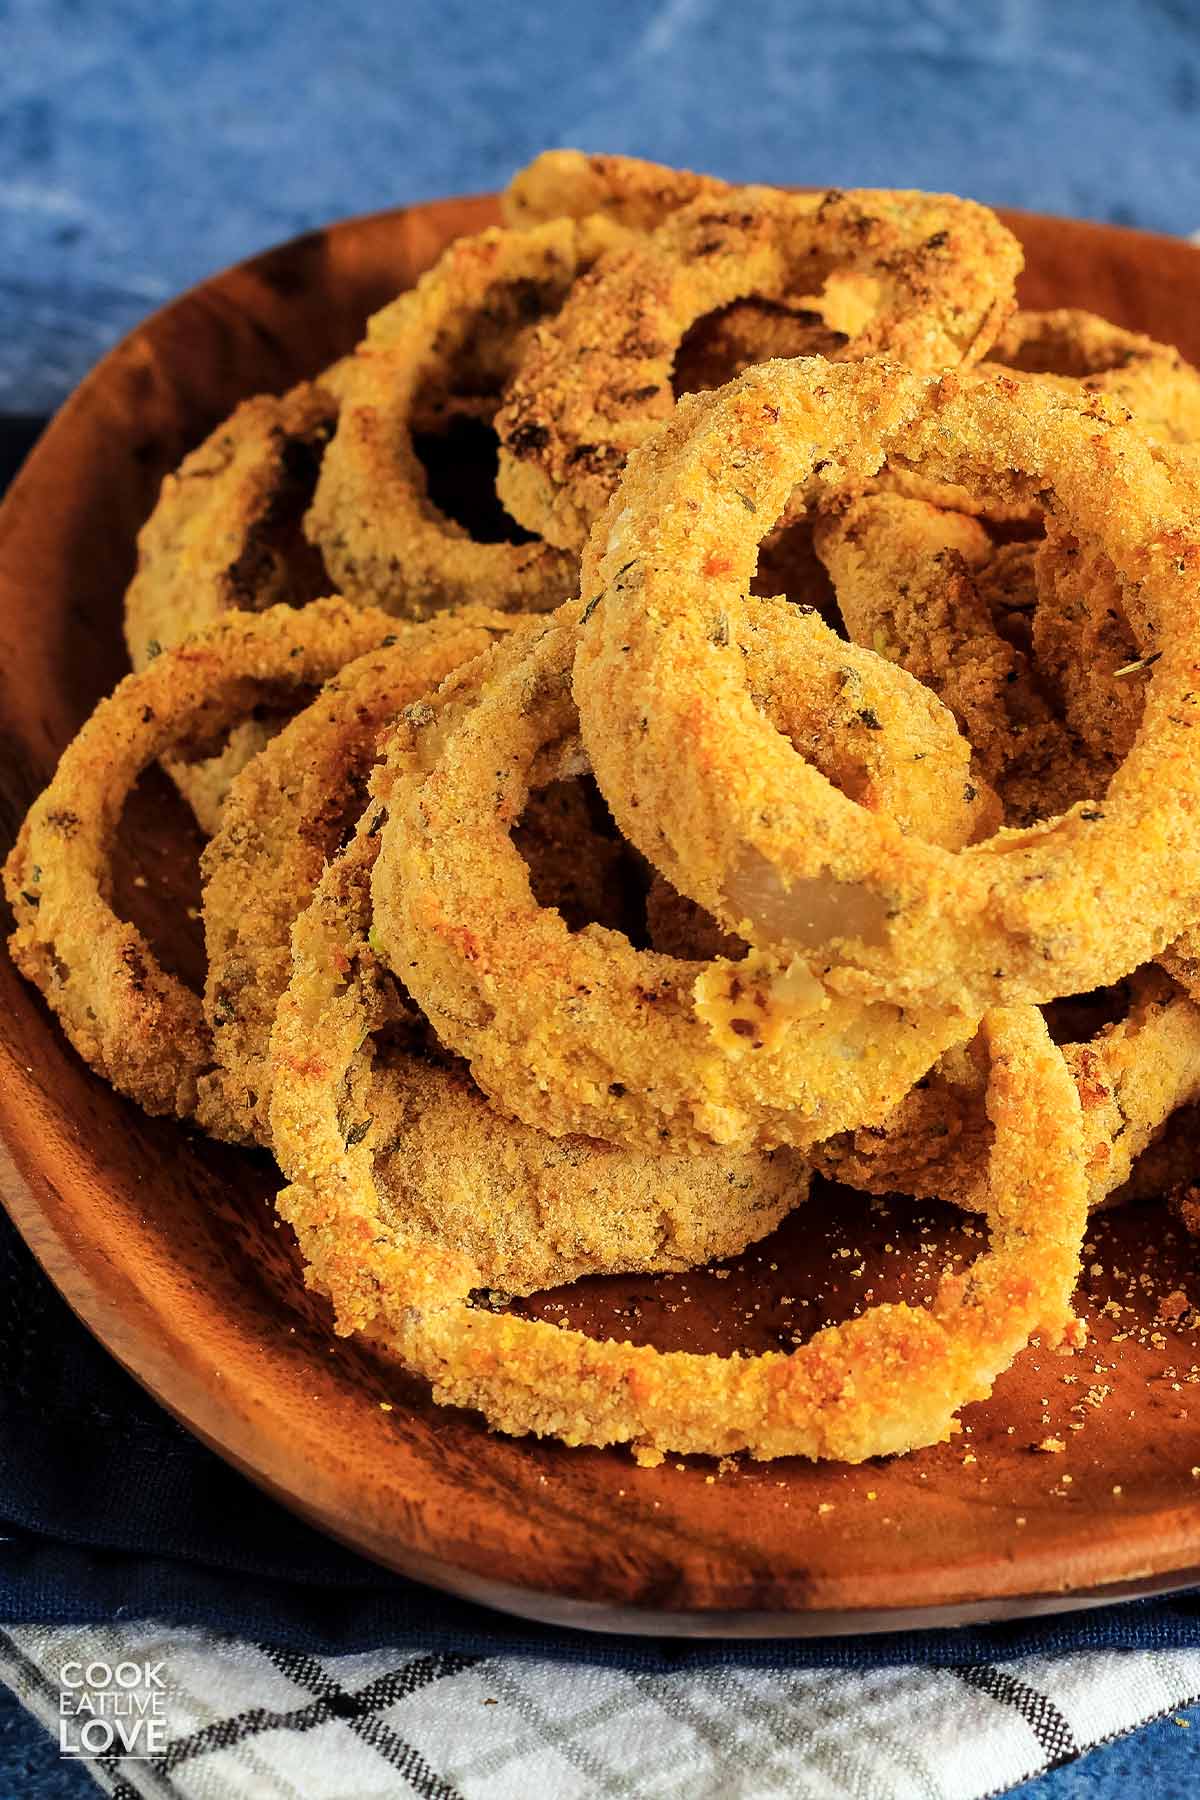 Plate of vegan baked onion rings with ketchup.